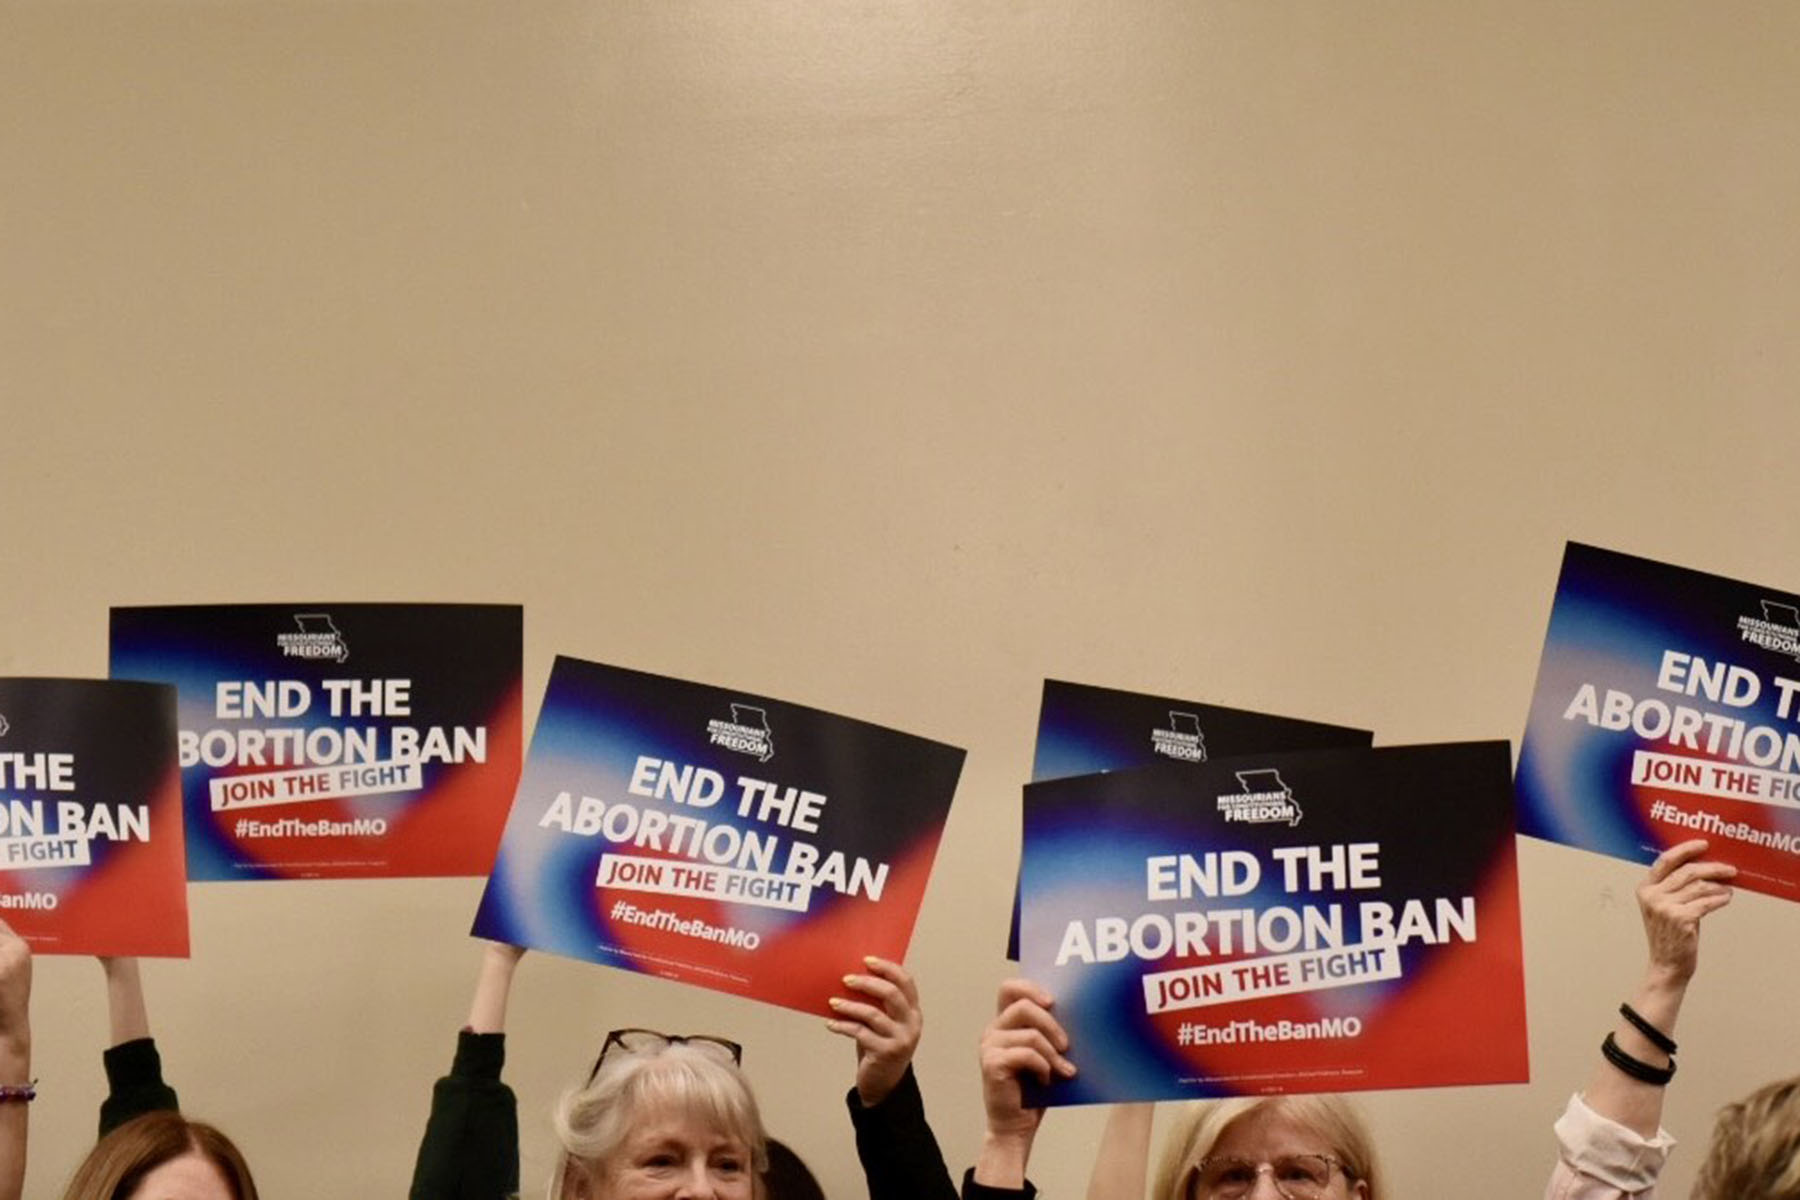 Supporters of a campaign hoping to amend the state constitution to roll back Missouri’s abortion ban lift signs that read "End The Abortion Ban: Join The Fight"